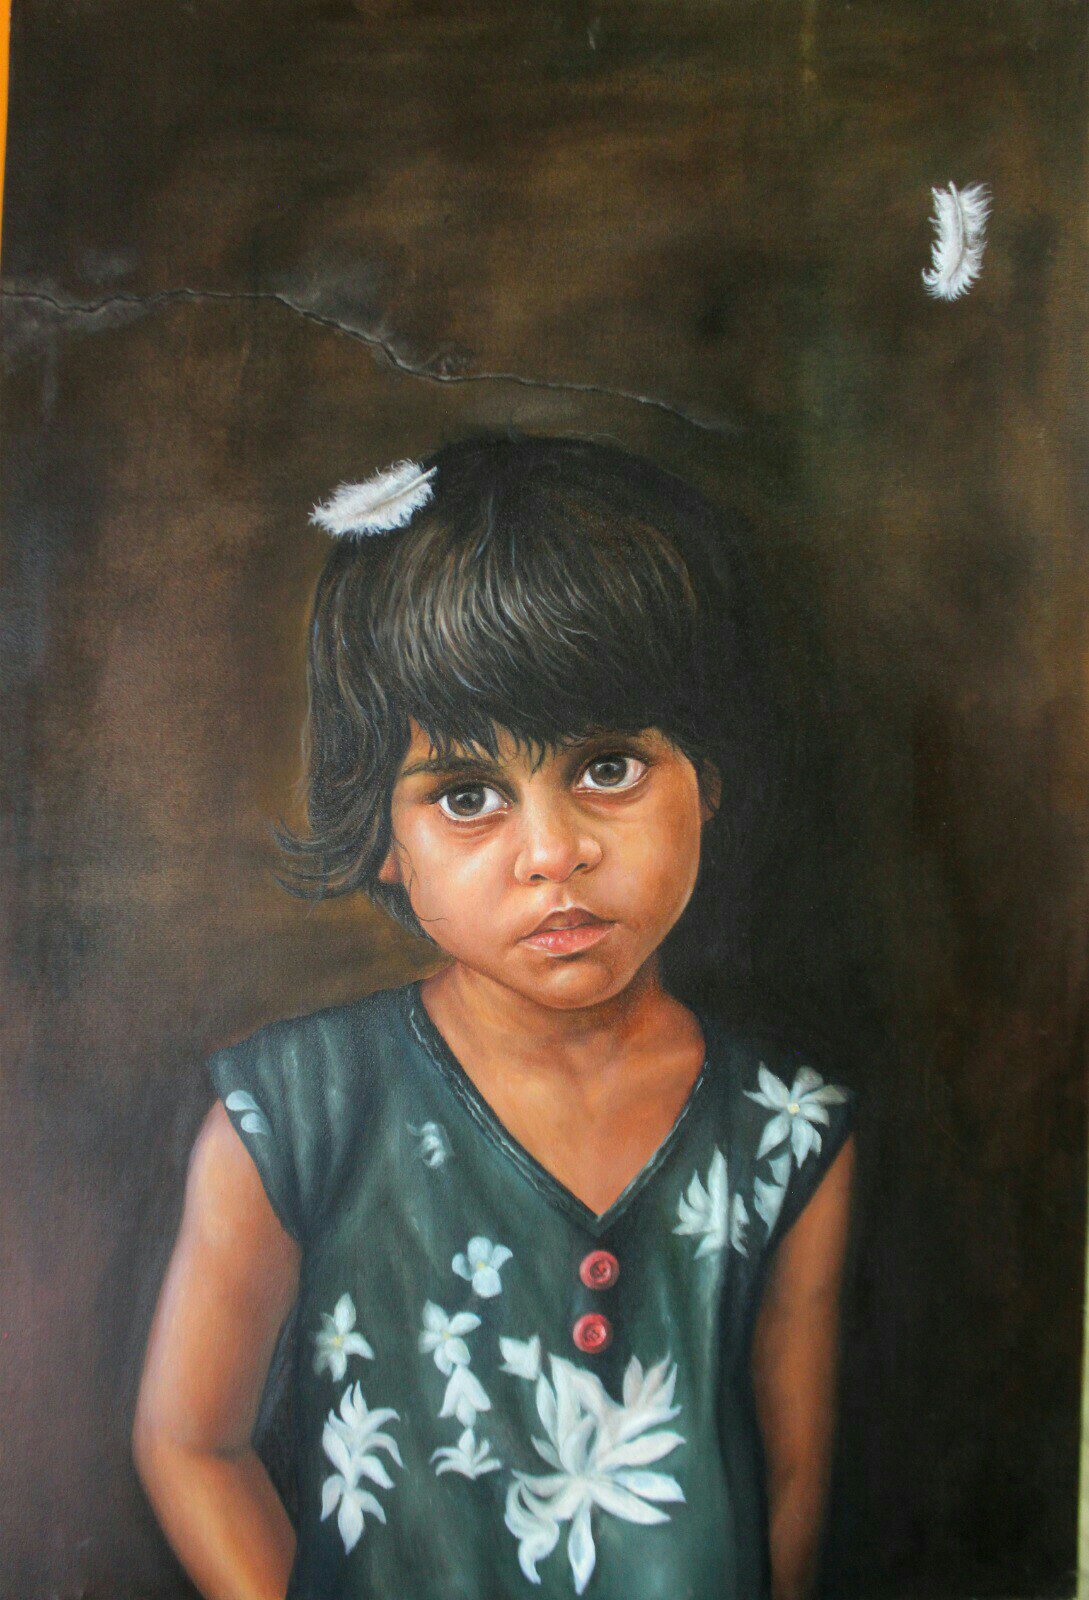 Medium: Oil on canvas <br> Size:  24x36 inches